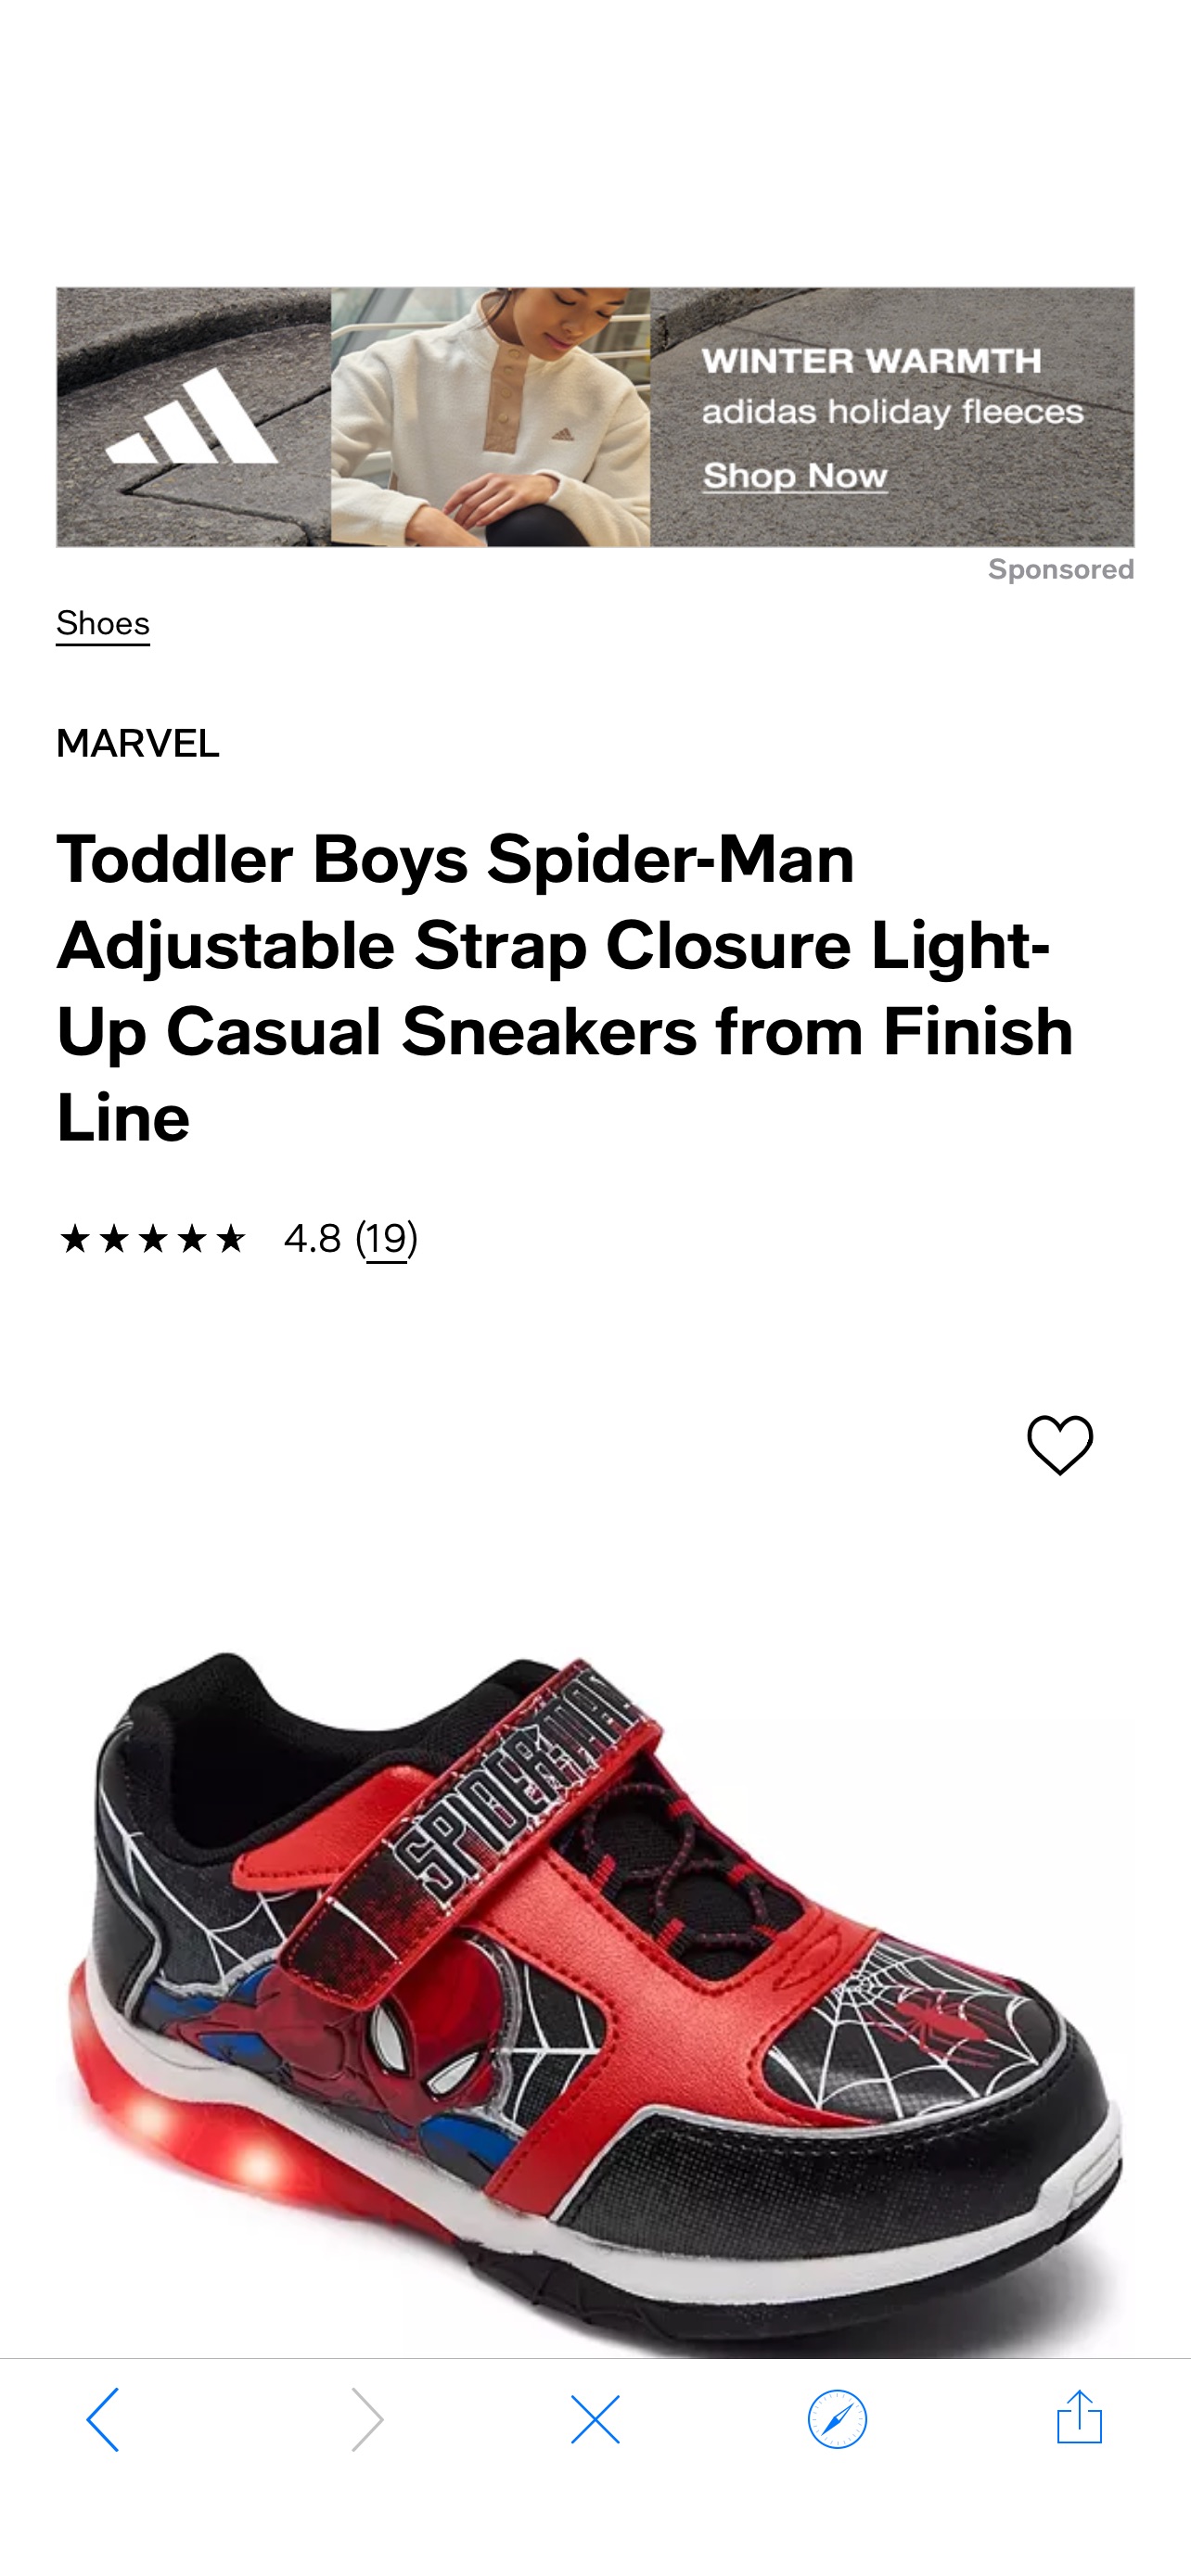 Marvel Toddler Boys Spider-Man Adjustable Strap Closure Light-Up Casual Sneakers from Finish Line - Macy's